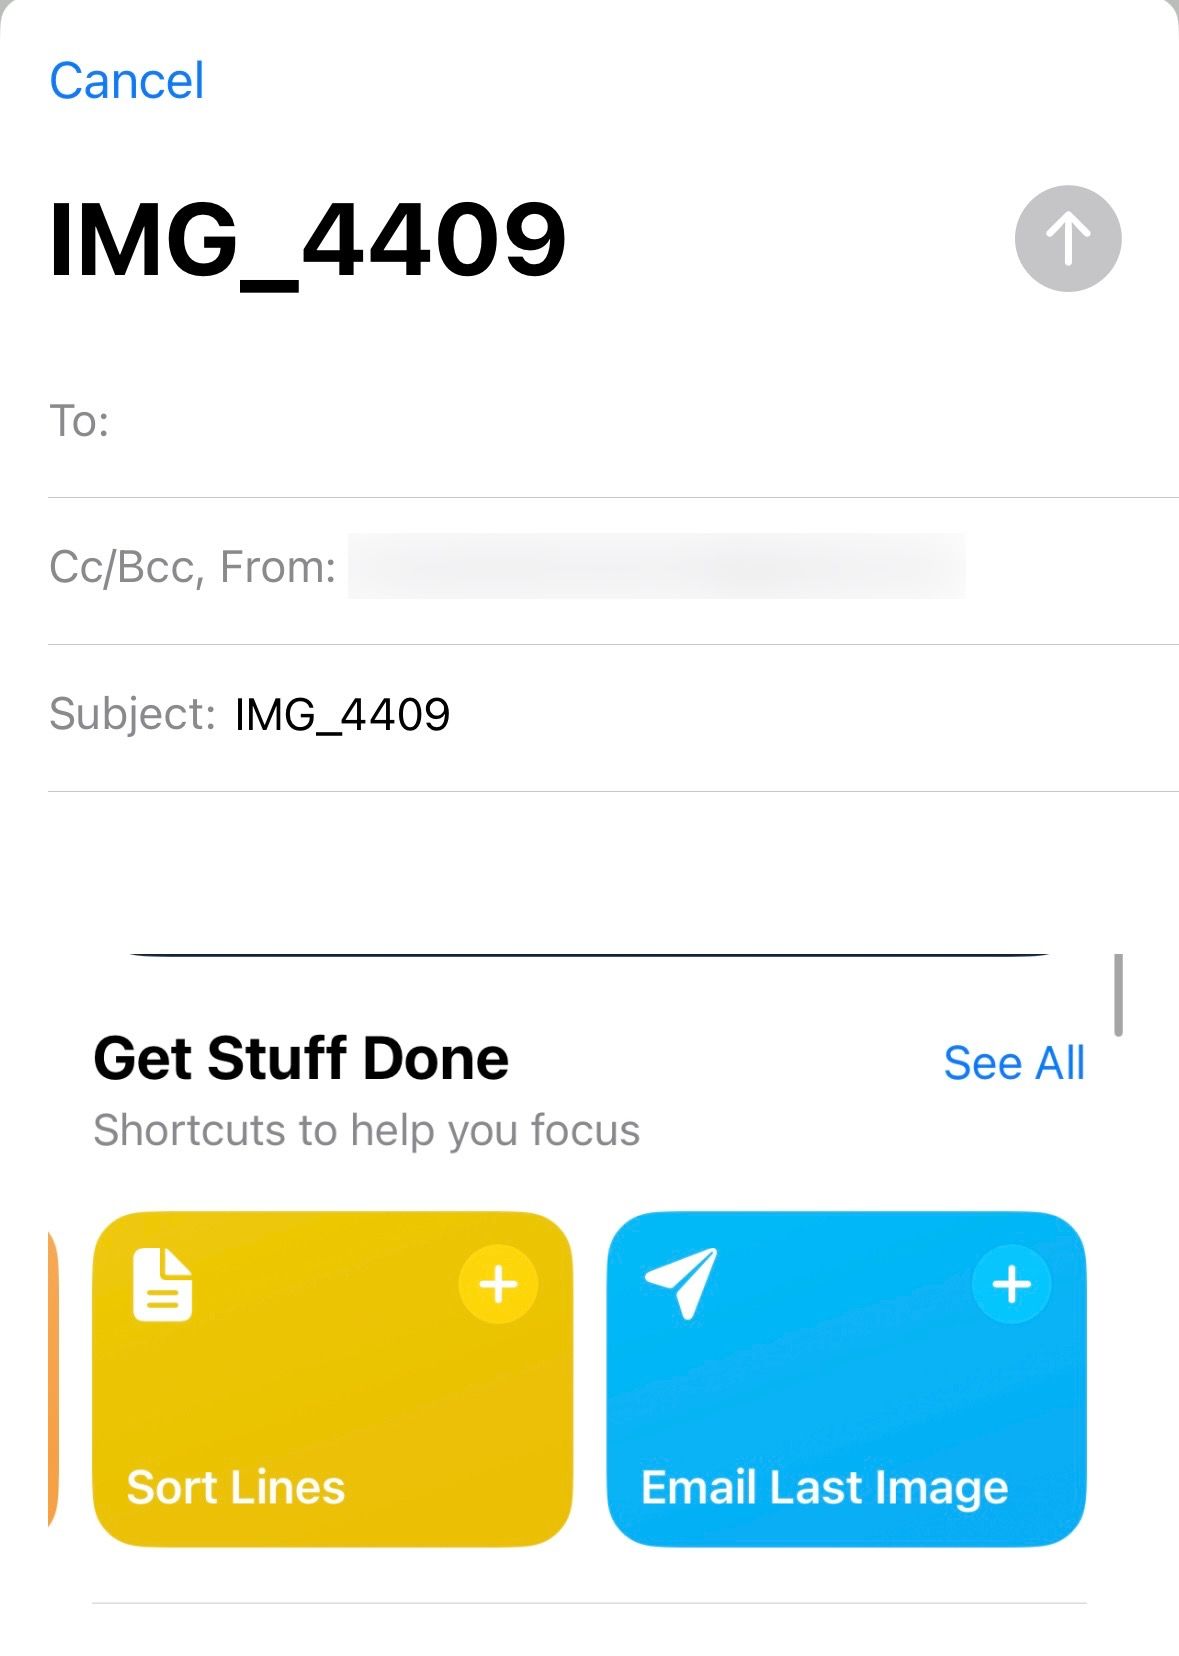 An email generated from "Email Last Image" shortcut.